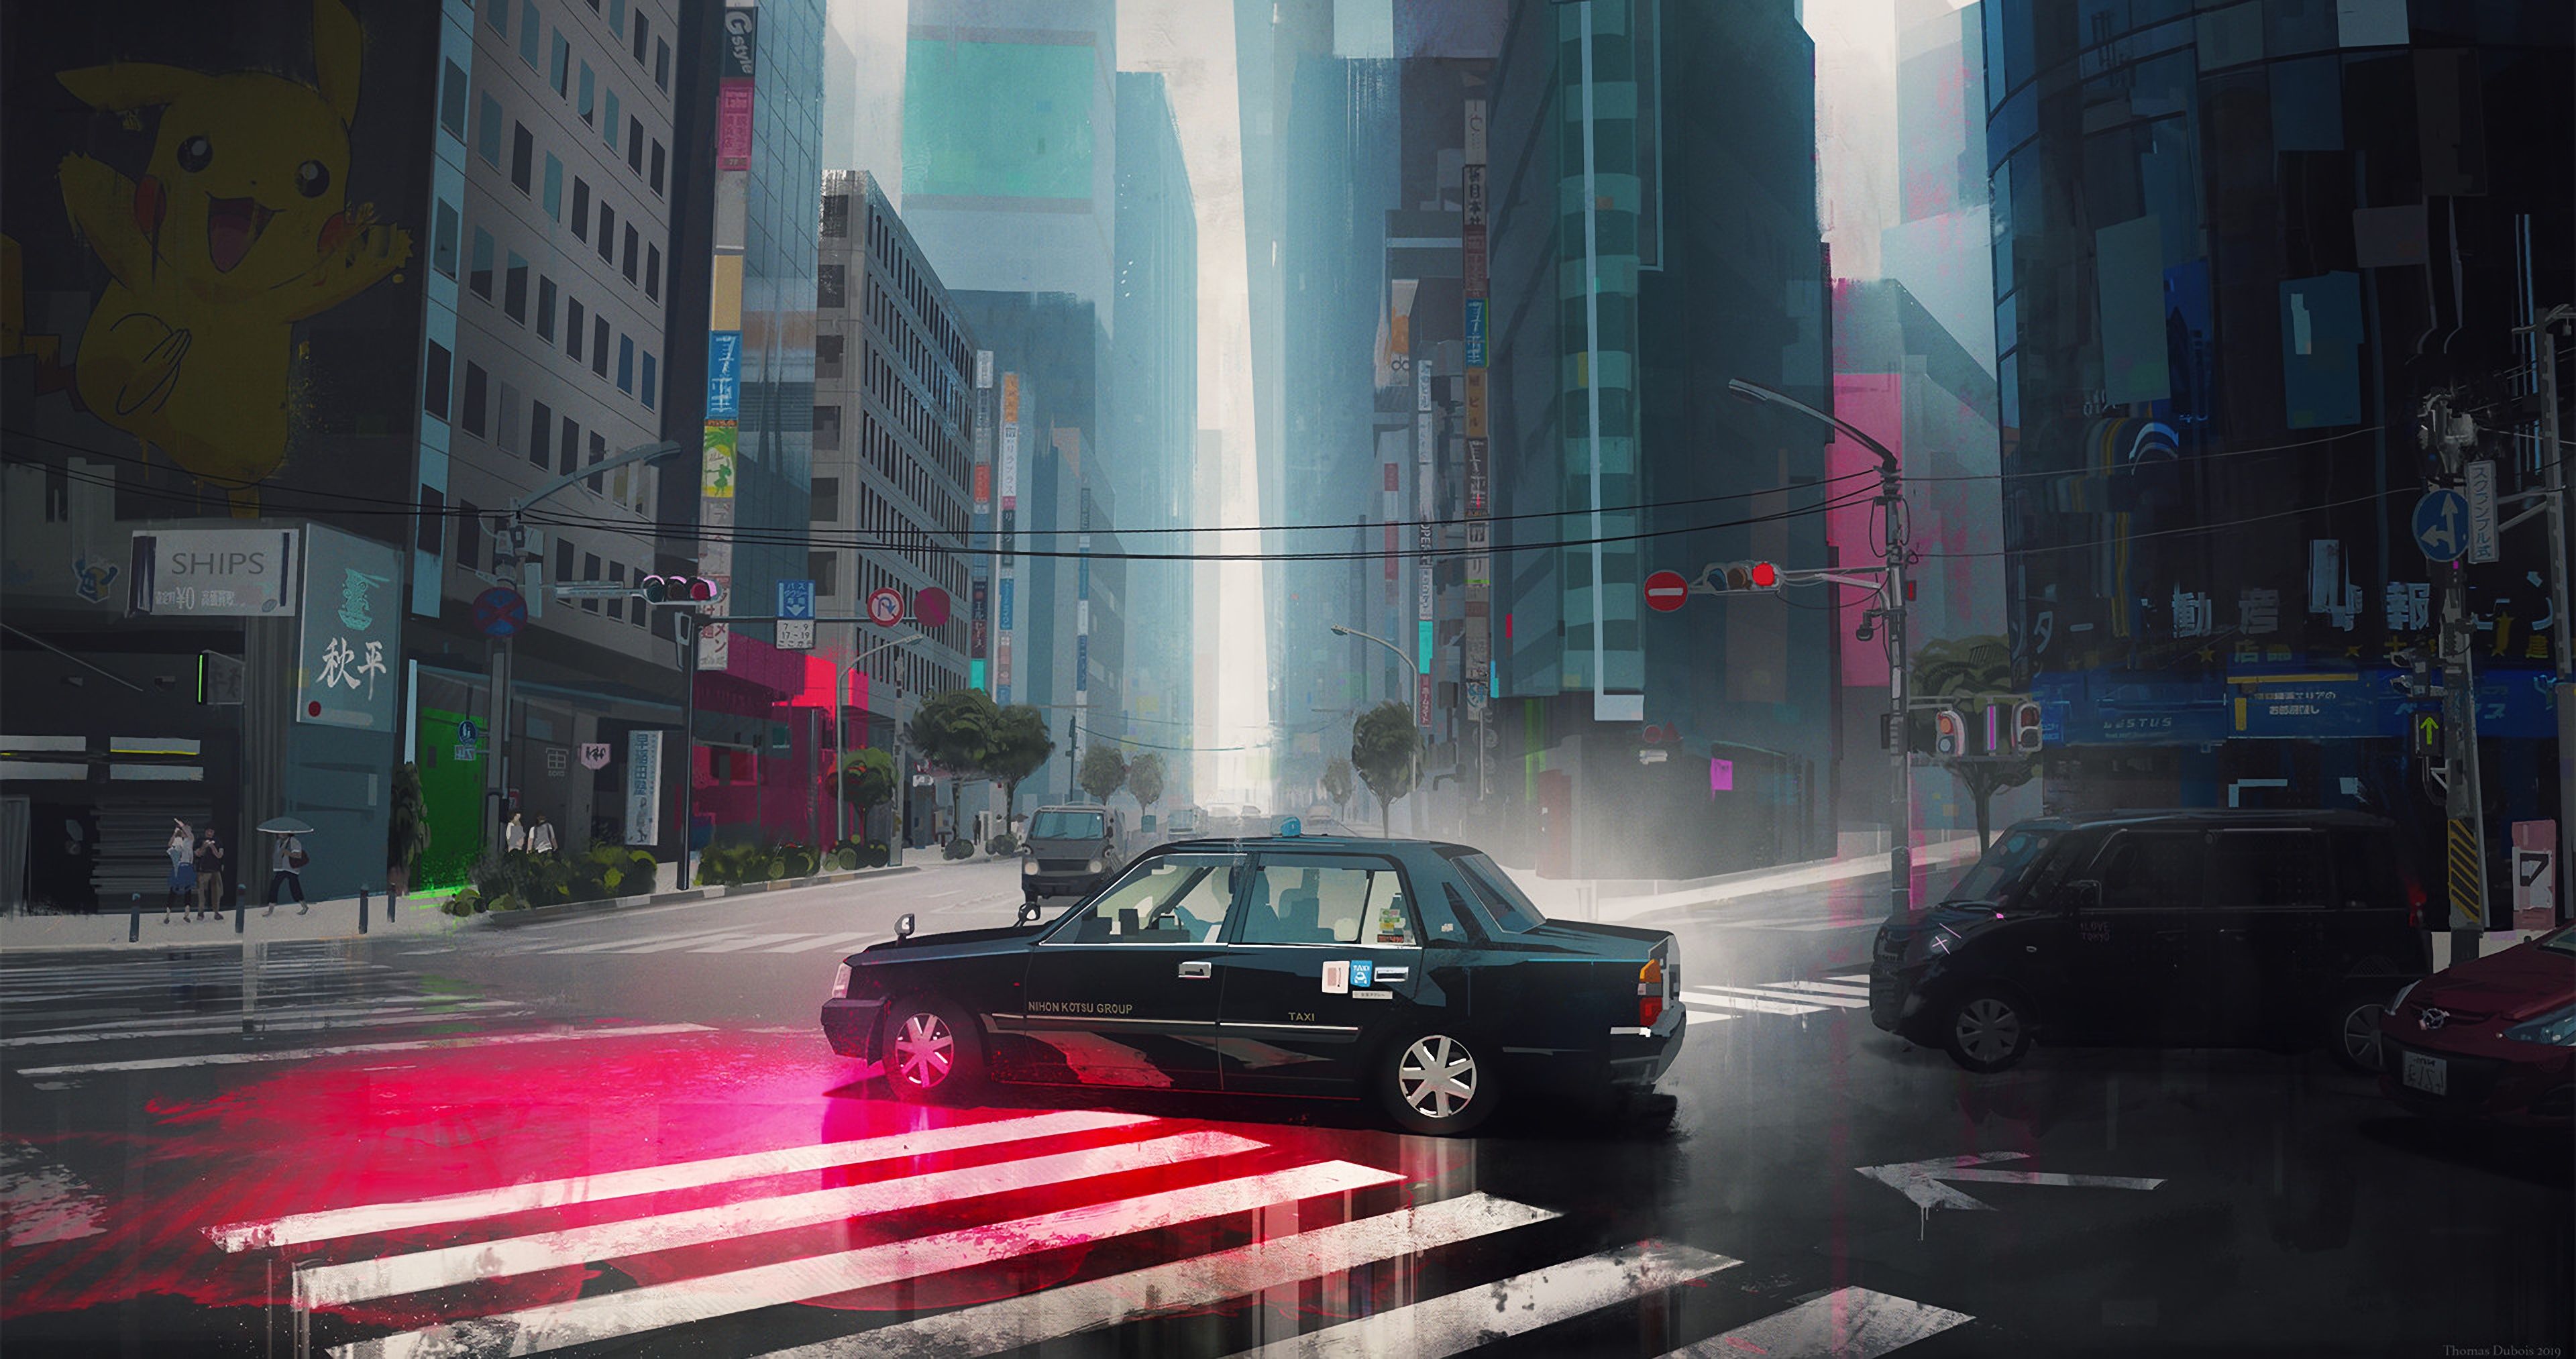 The Tokyo Street Taxi 4k, HD Artist, 4k Wallpaper, Image, Background, Photo and Picture